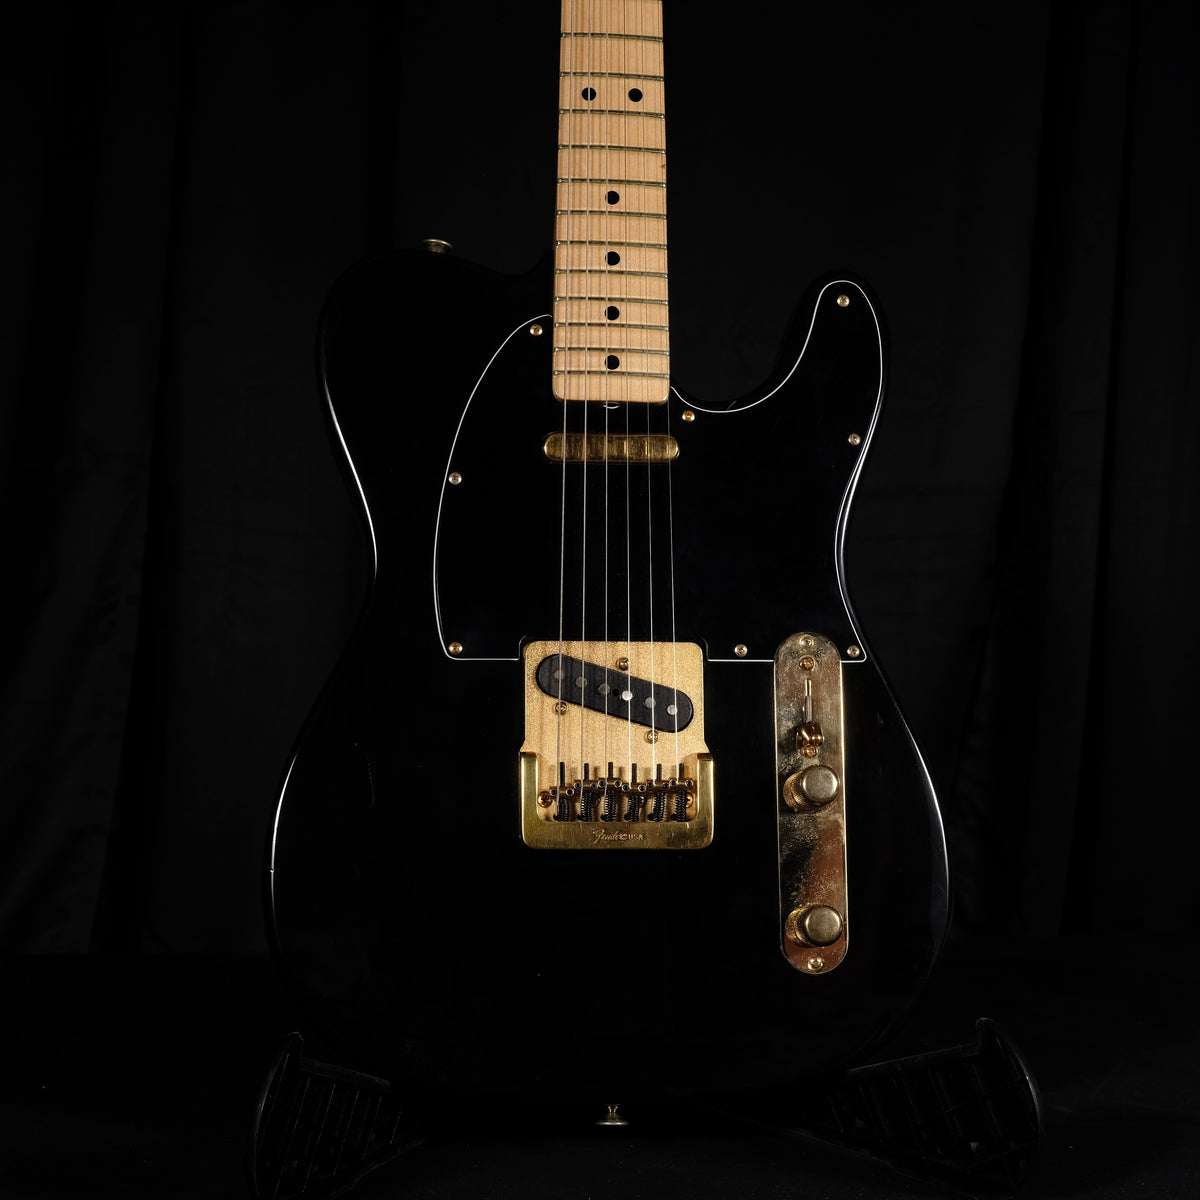 Fender Collector's Edition Black and Gold Telecaster